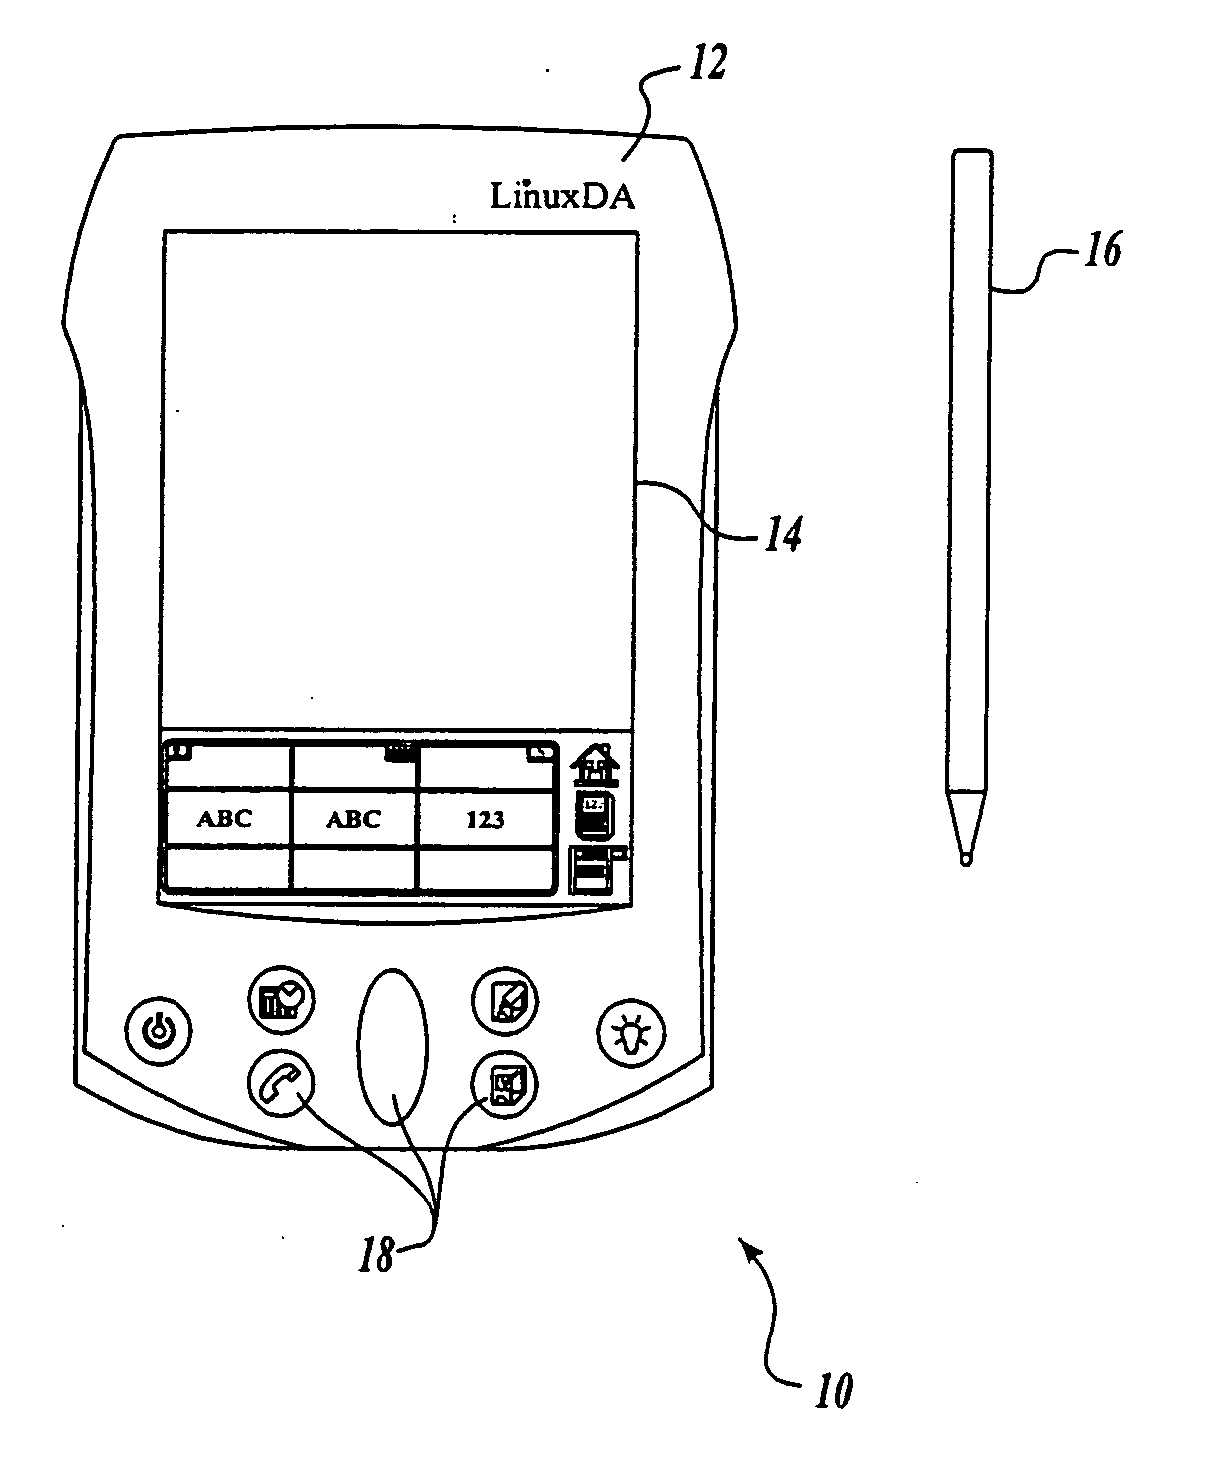 System and method of pen-based data input into a computing device